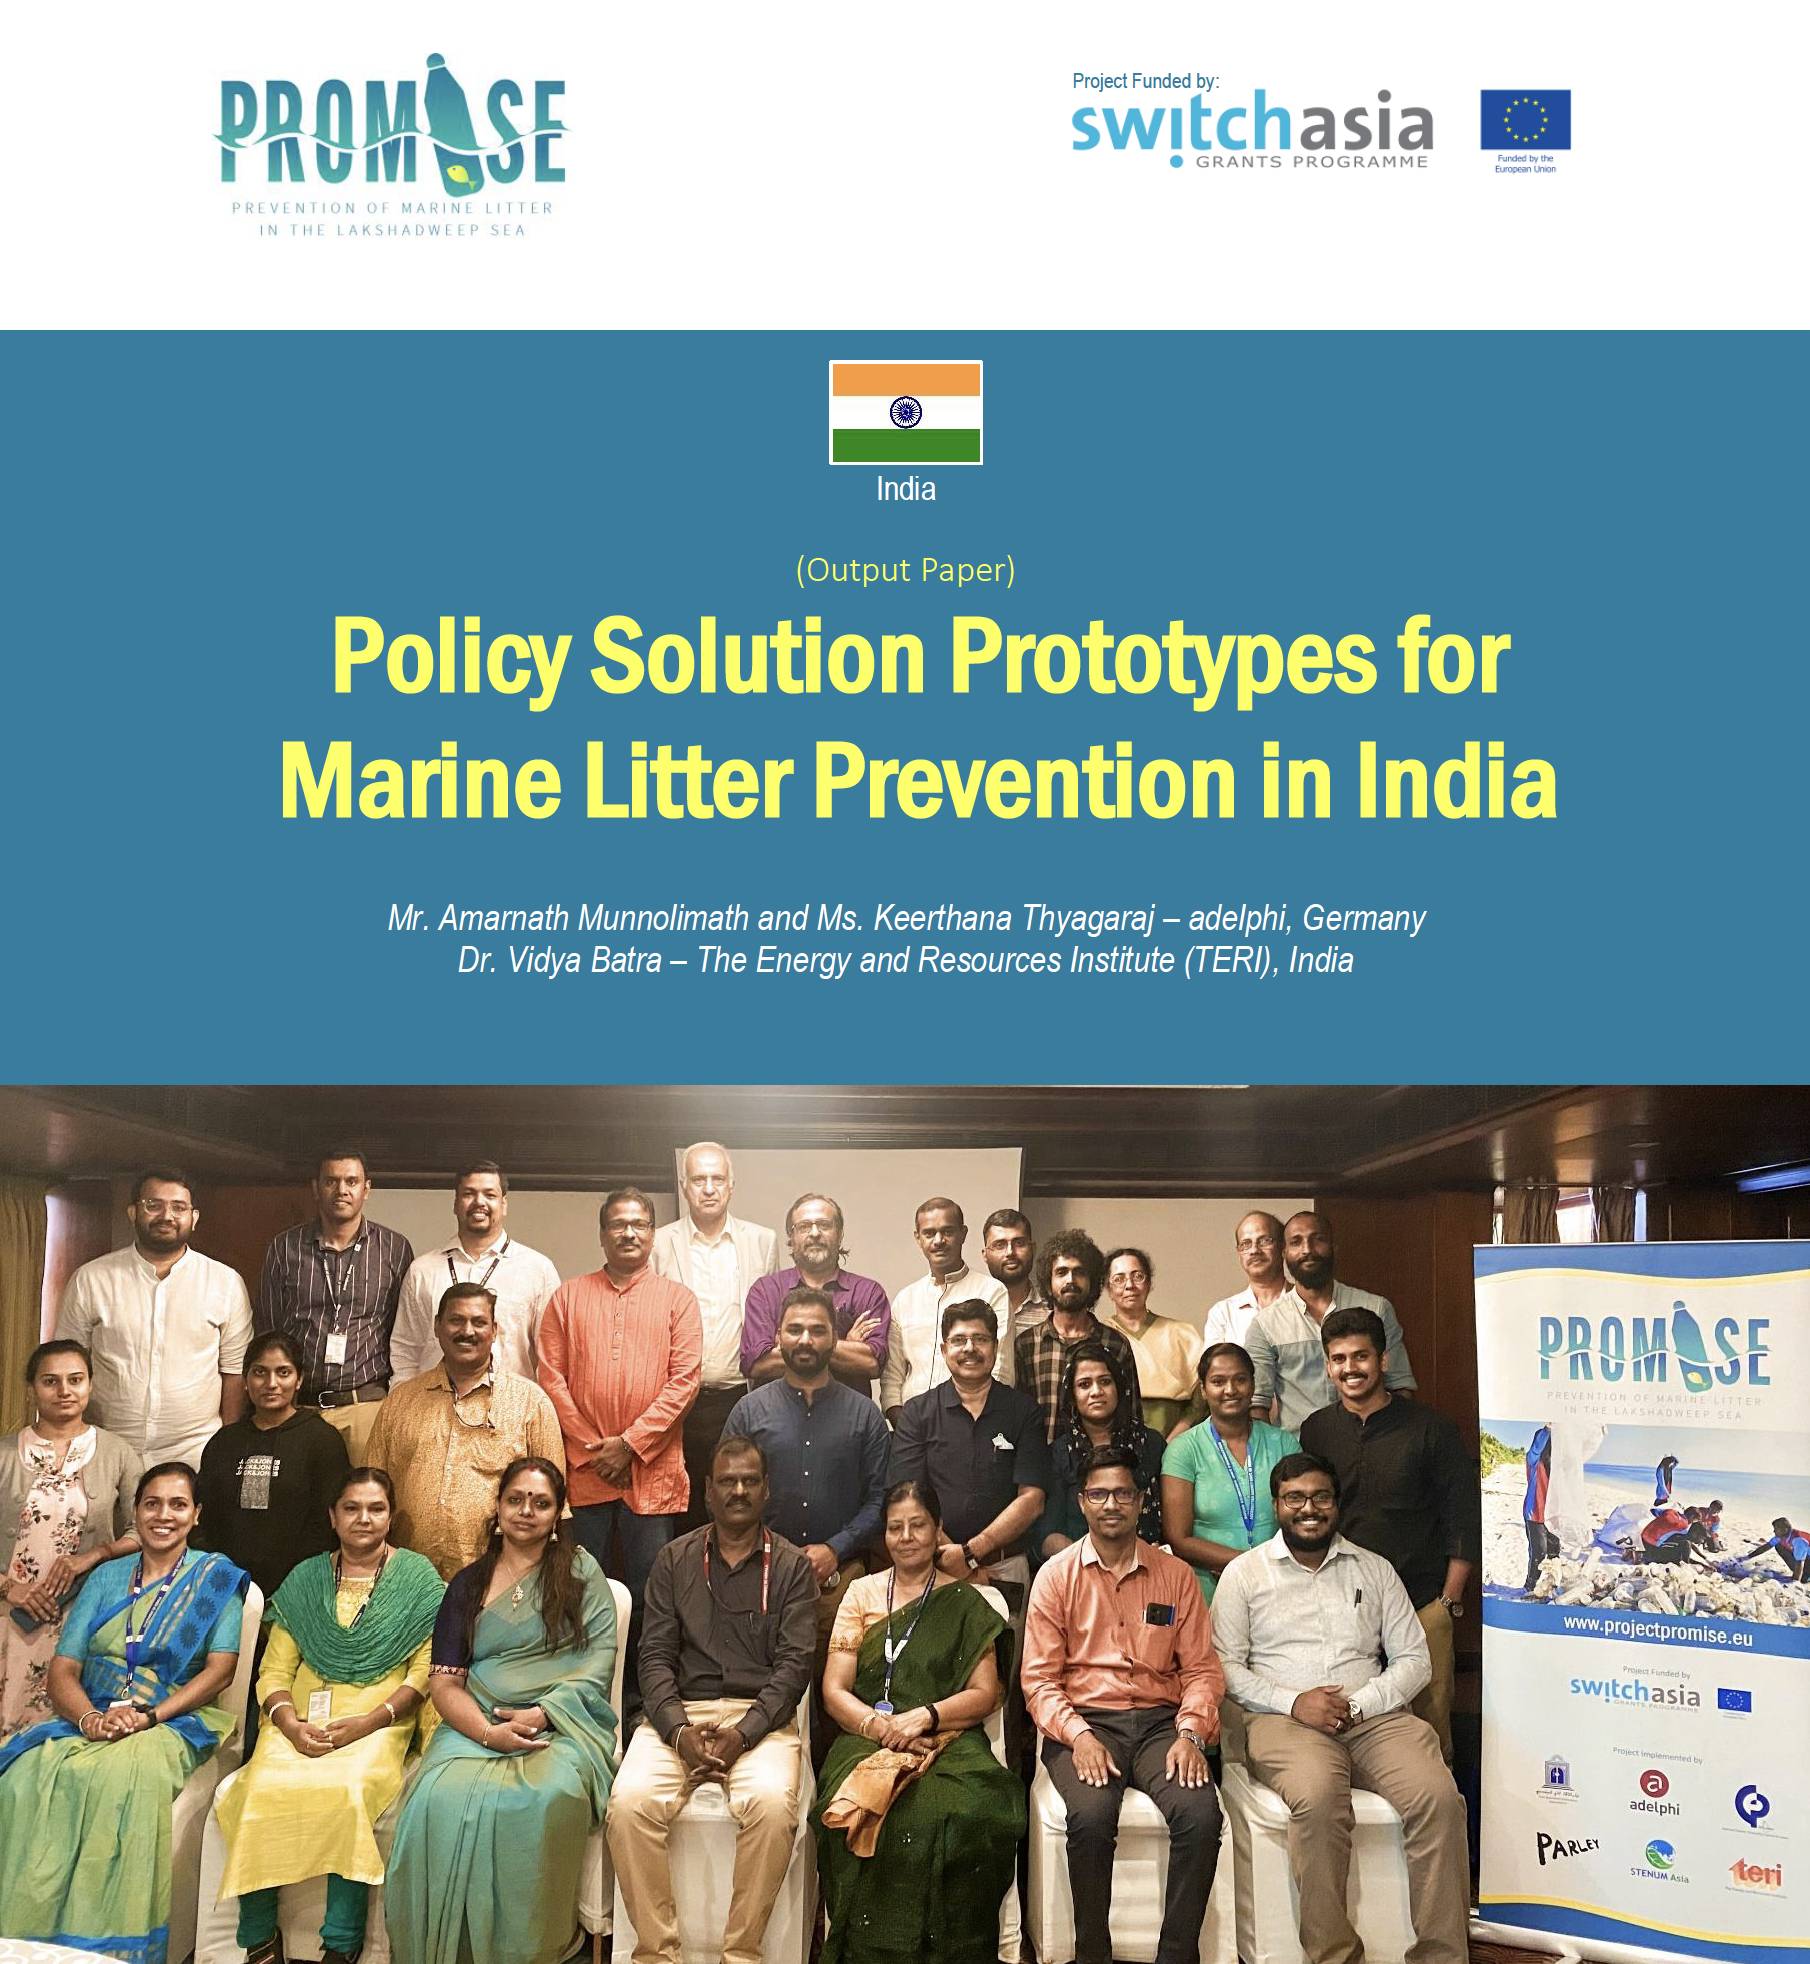 Policy Solution Prototypes for Marine Litter Prevention in India